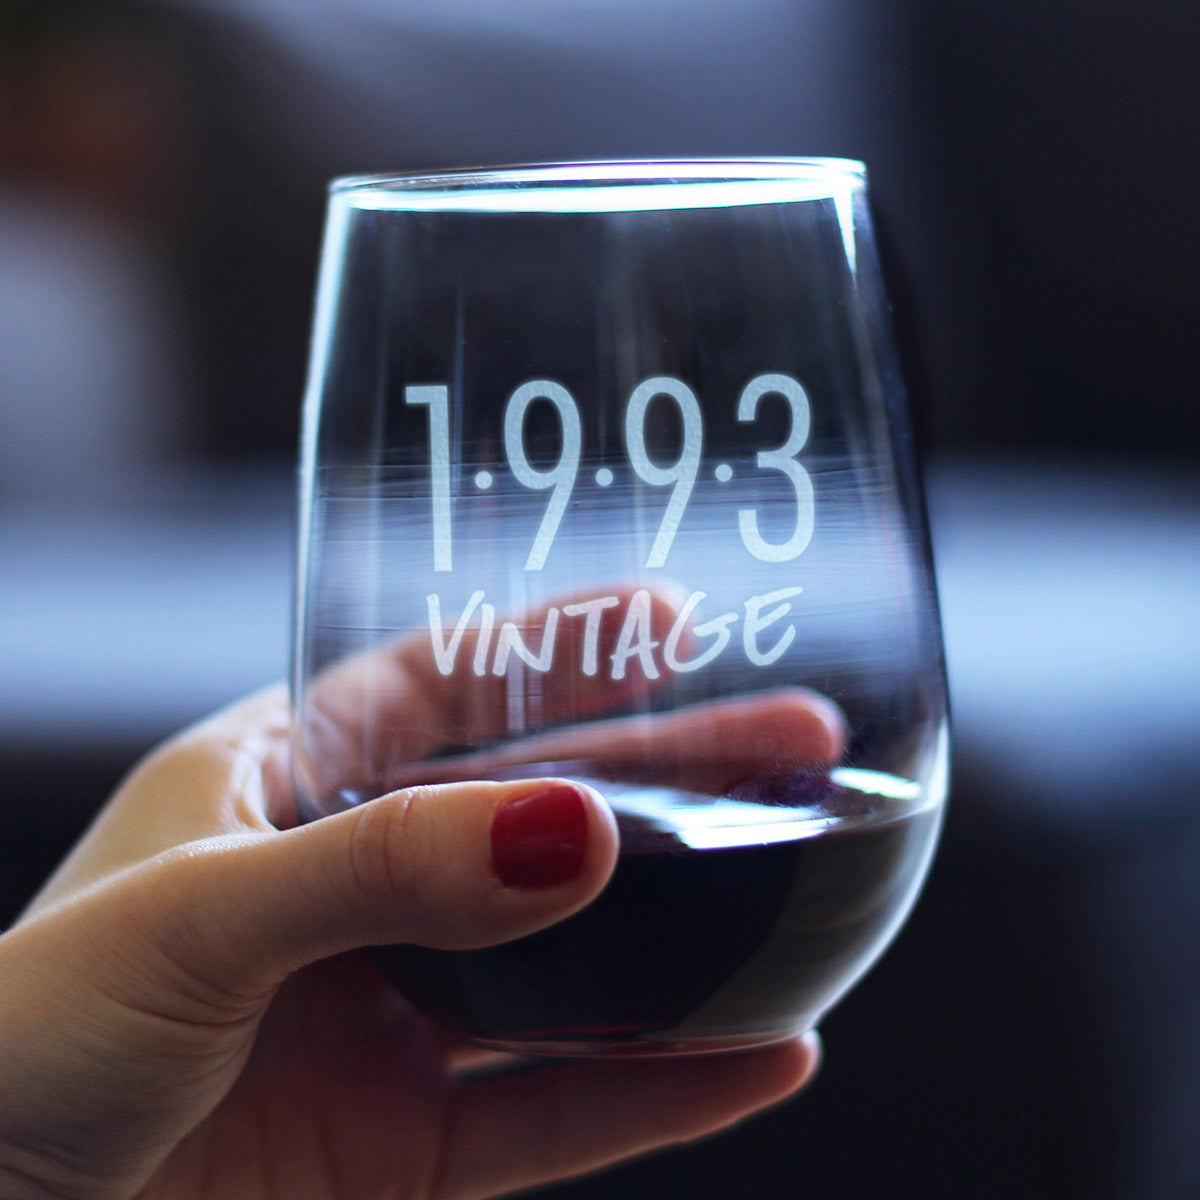 Vintage 1993 - 31st Birthday Stemless Wine Glass Gifts for Women &amp; Men Turning 31 - Bday Party Decor - Large Glasses